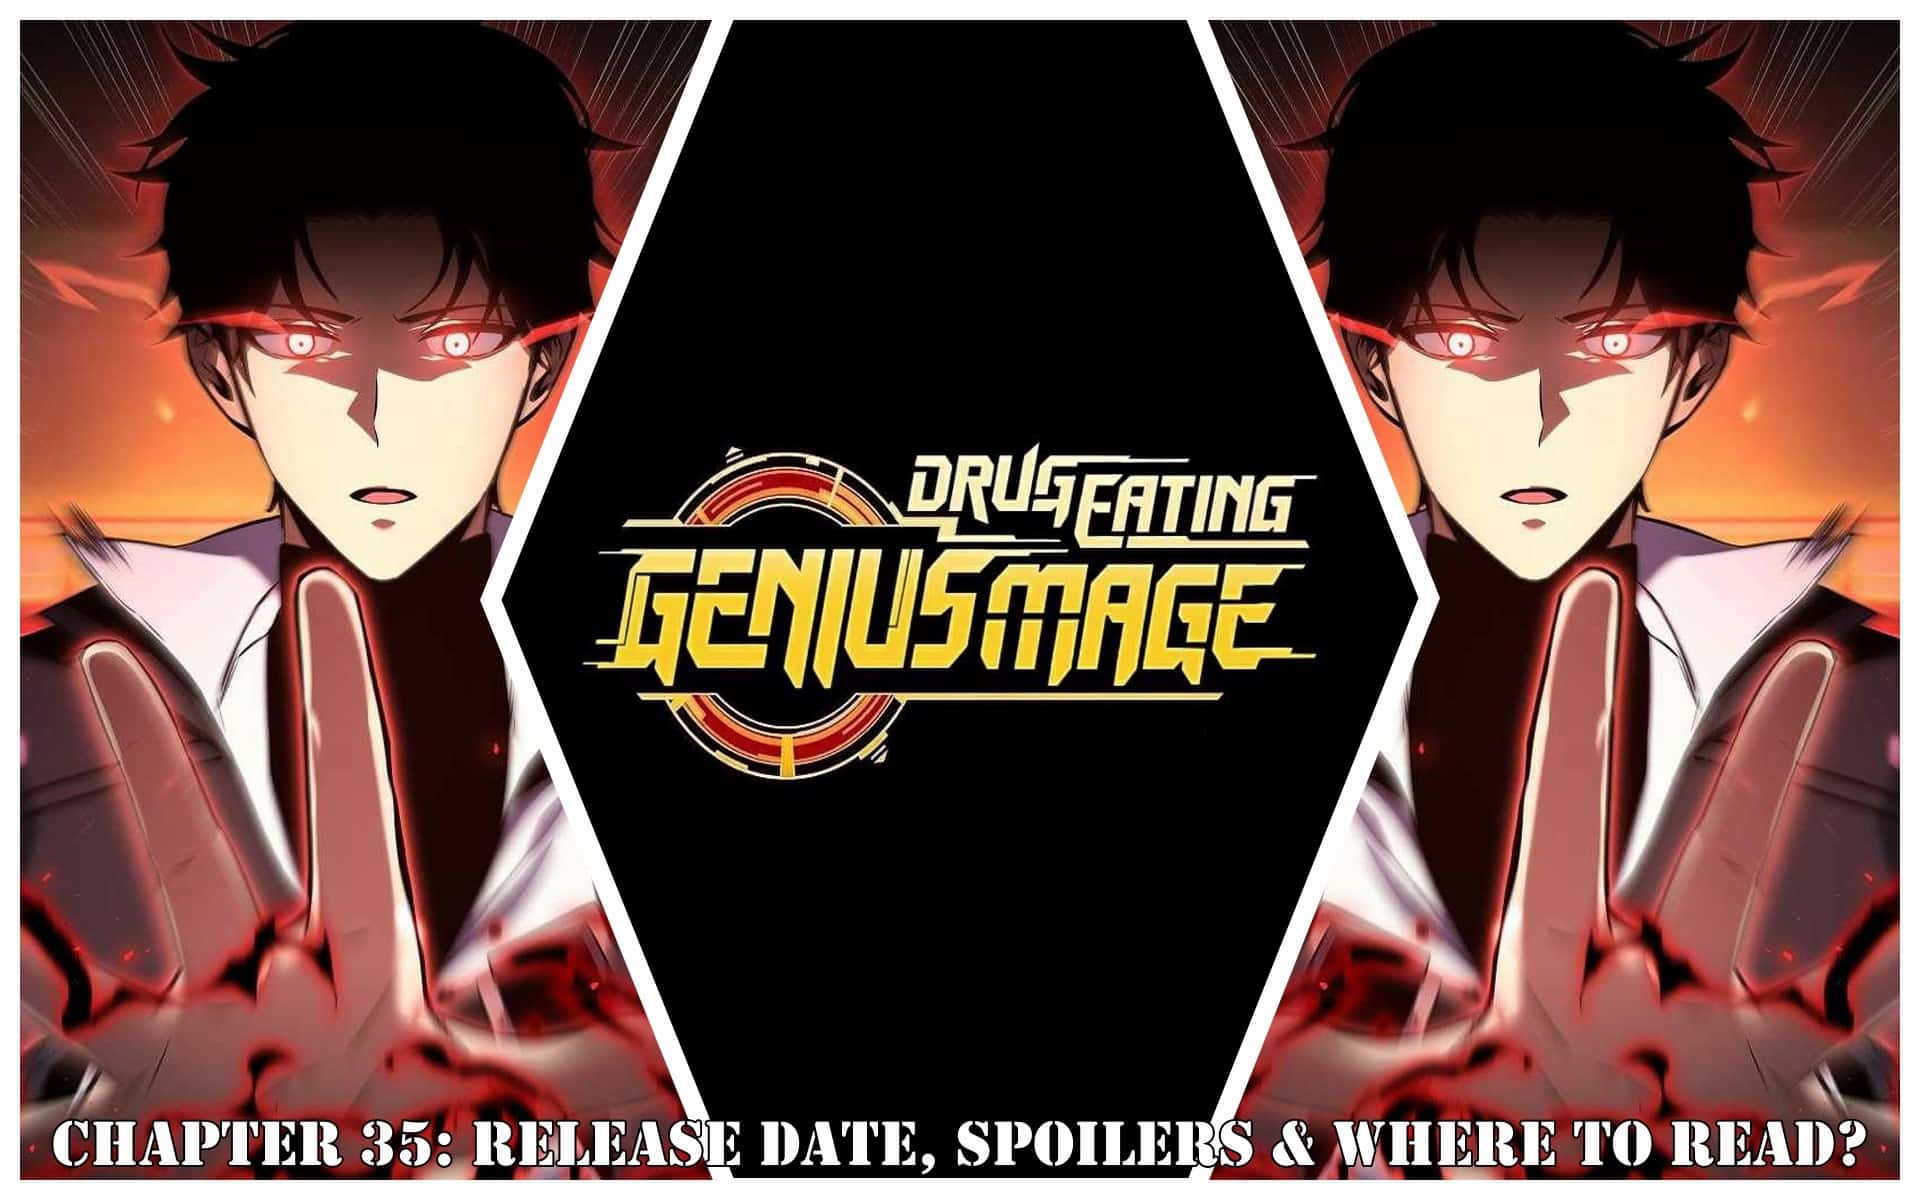 Drug-Eating Genius Mage Chapter 35: Release Date, Spoilers & Where to Read?